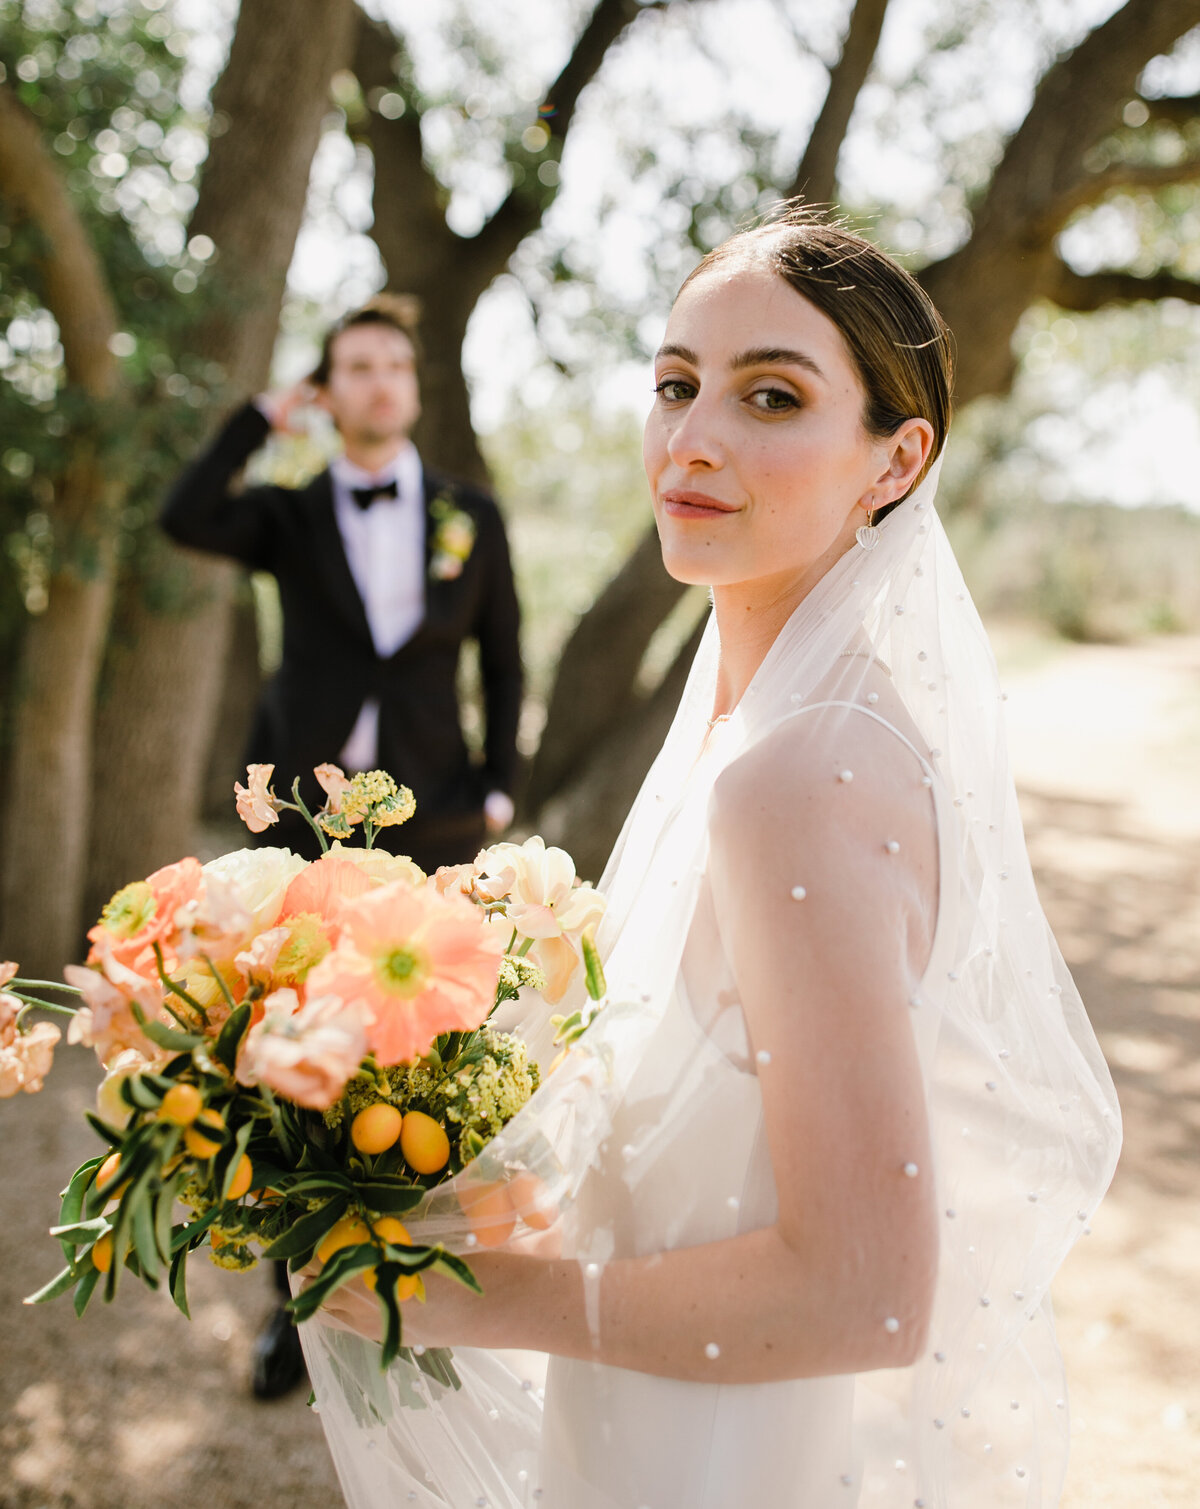 Bride with groom in background holding bouquet of bright orange and yellow florals